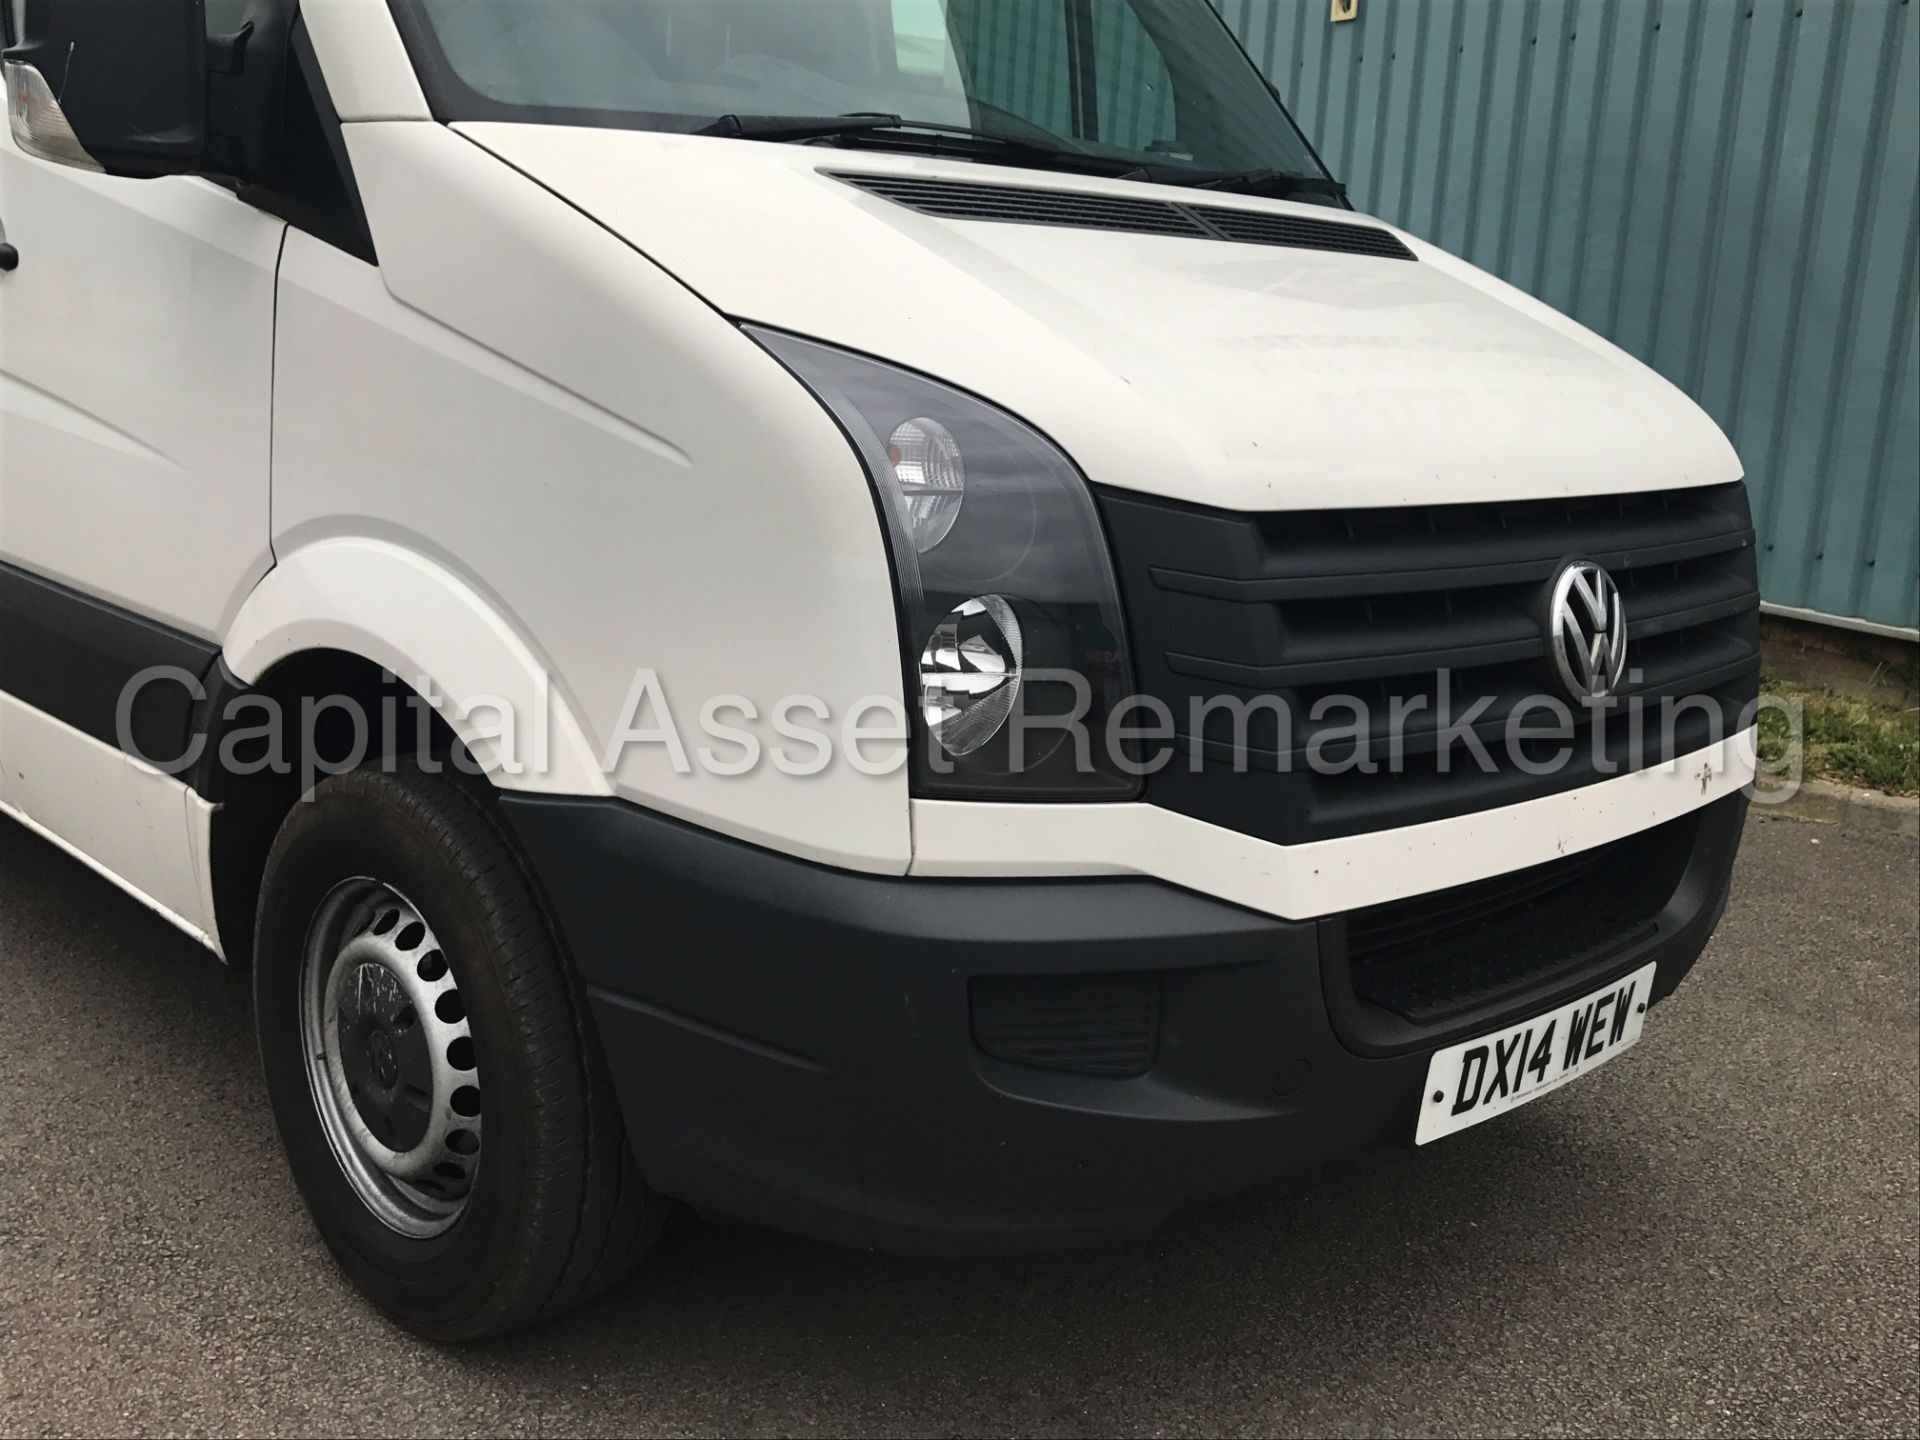 VOLKSWAGEN CRAFTER CR35 'MWB HI-ROOF' (2014) '2.0 TDI - 109 PS - 6 SPEED' *1 COMPANY OWNER FROM NEW* - Image 10 of 19